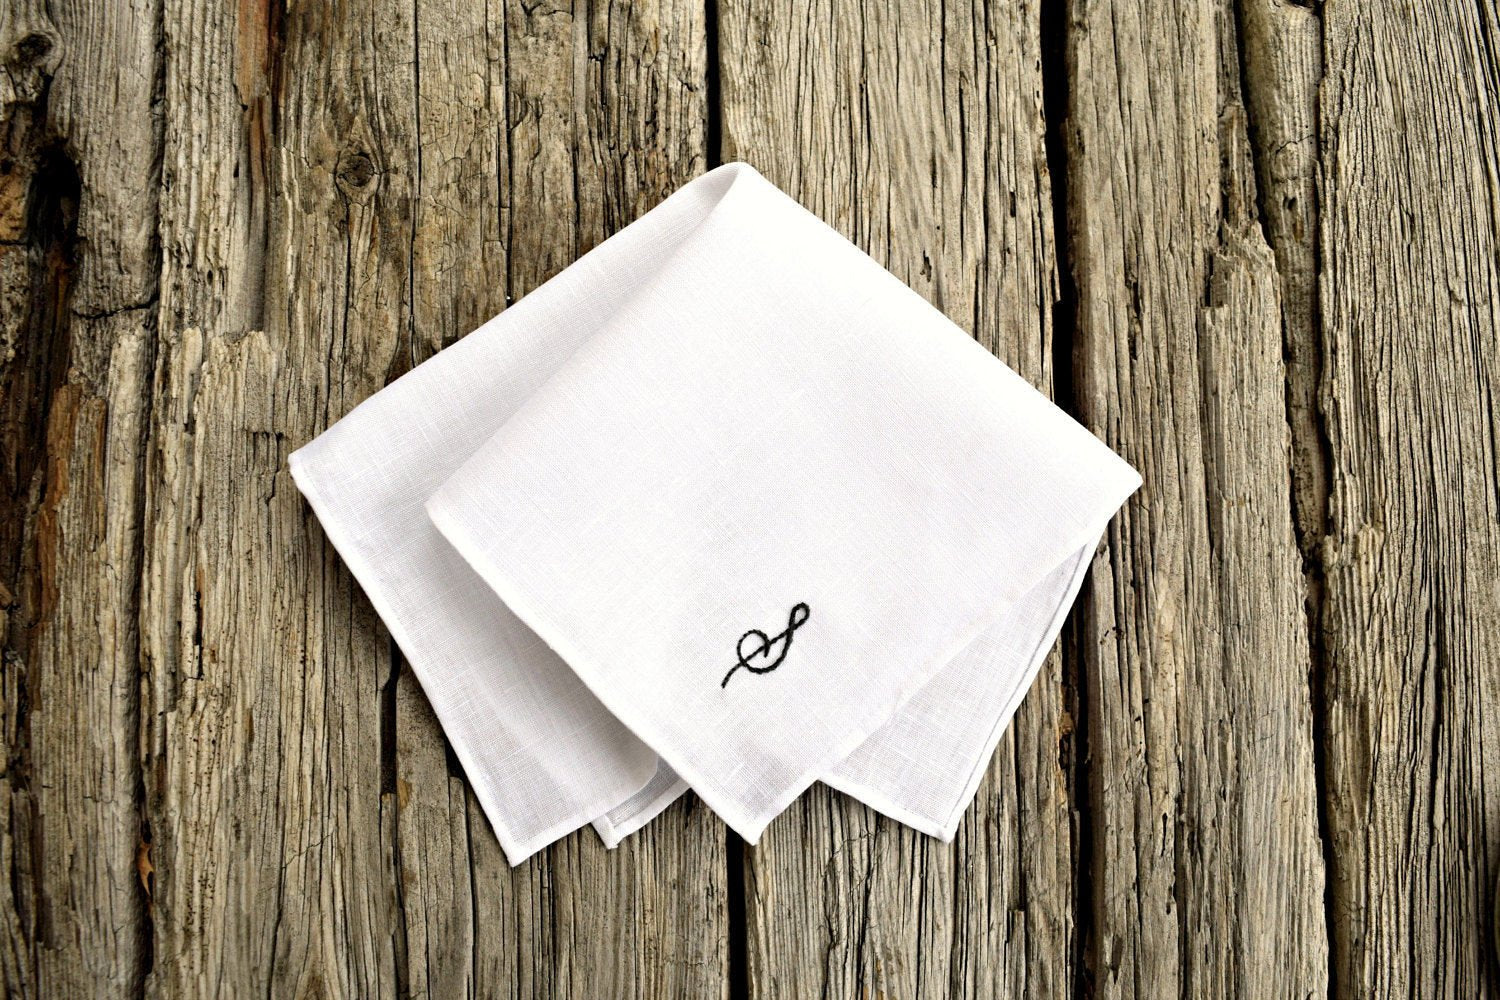 White Irish linen pocket square with hand rolled hem and hand embroidered initial in black